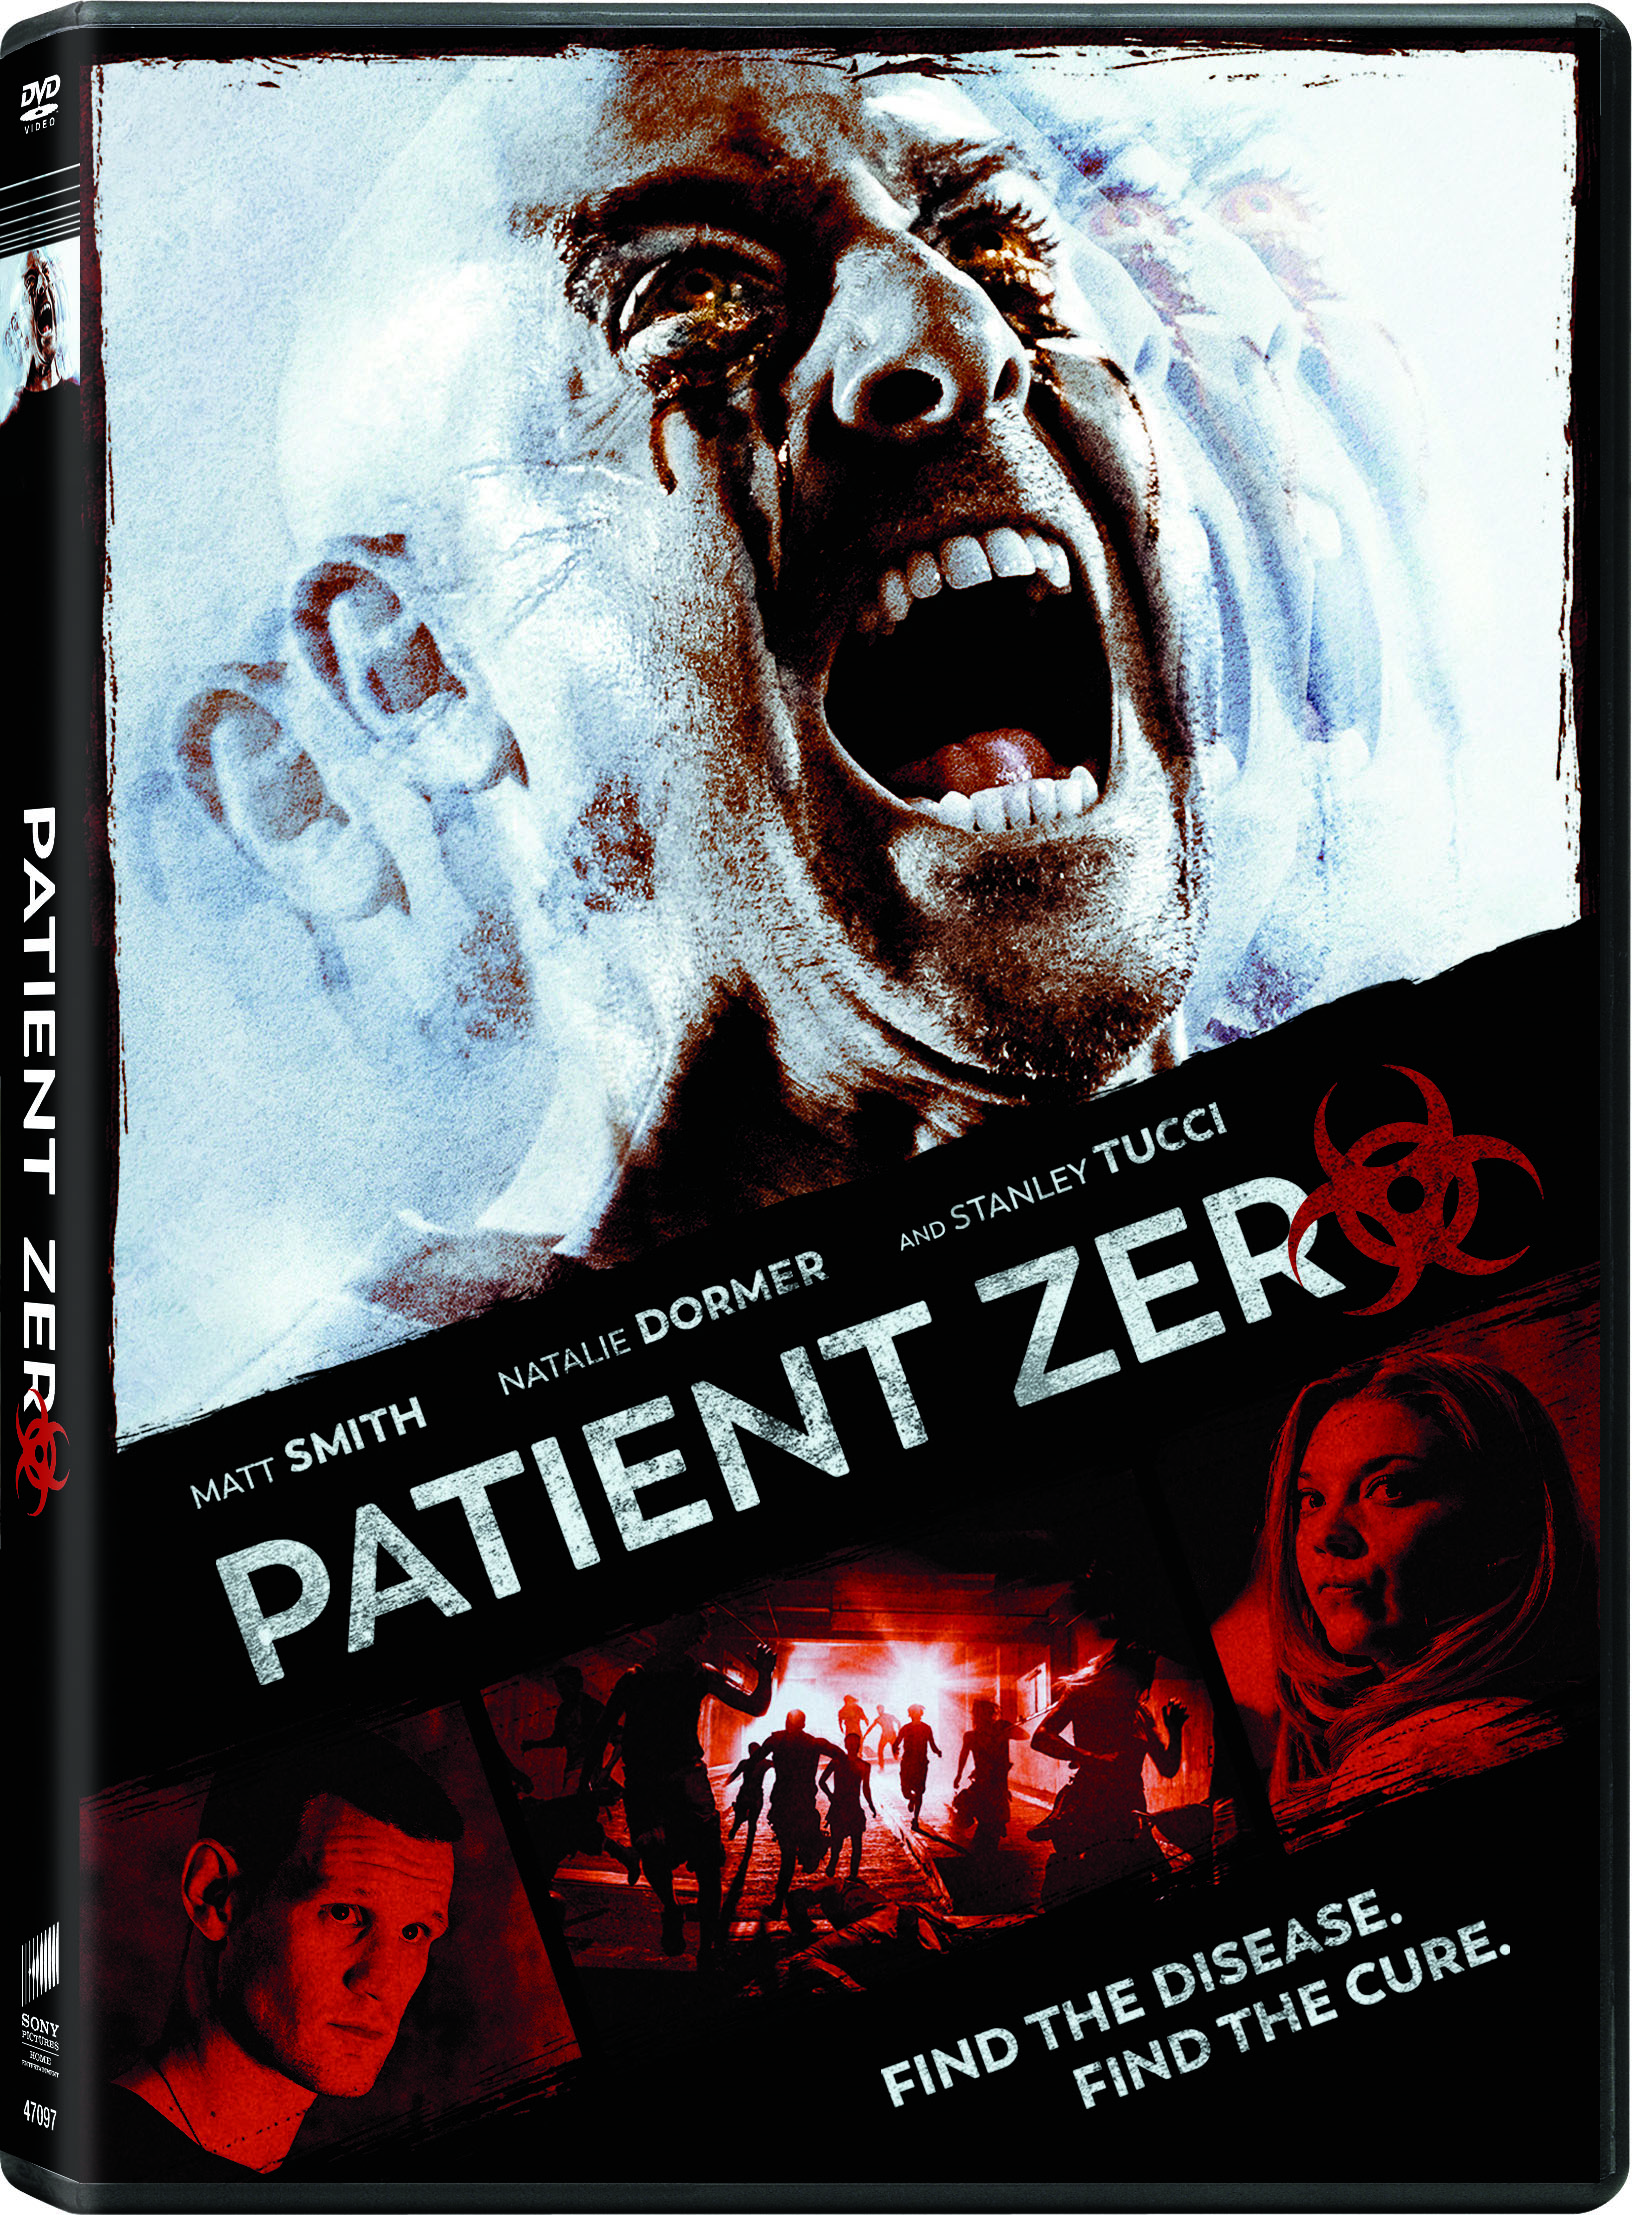 Patient Zero DVD cover (Sony Pictures Home Entertainment)